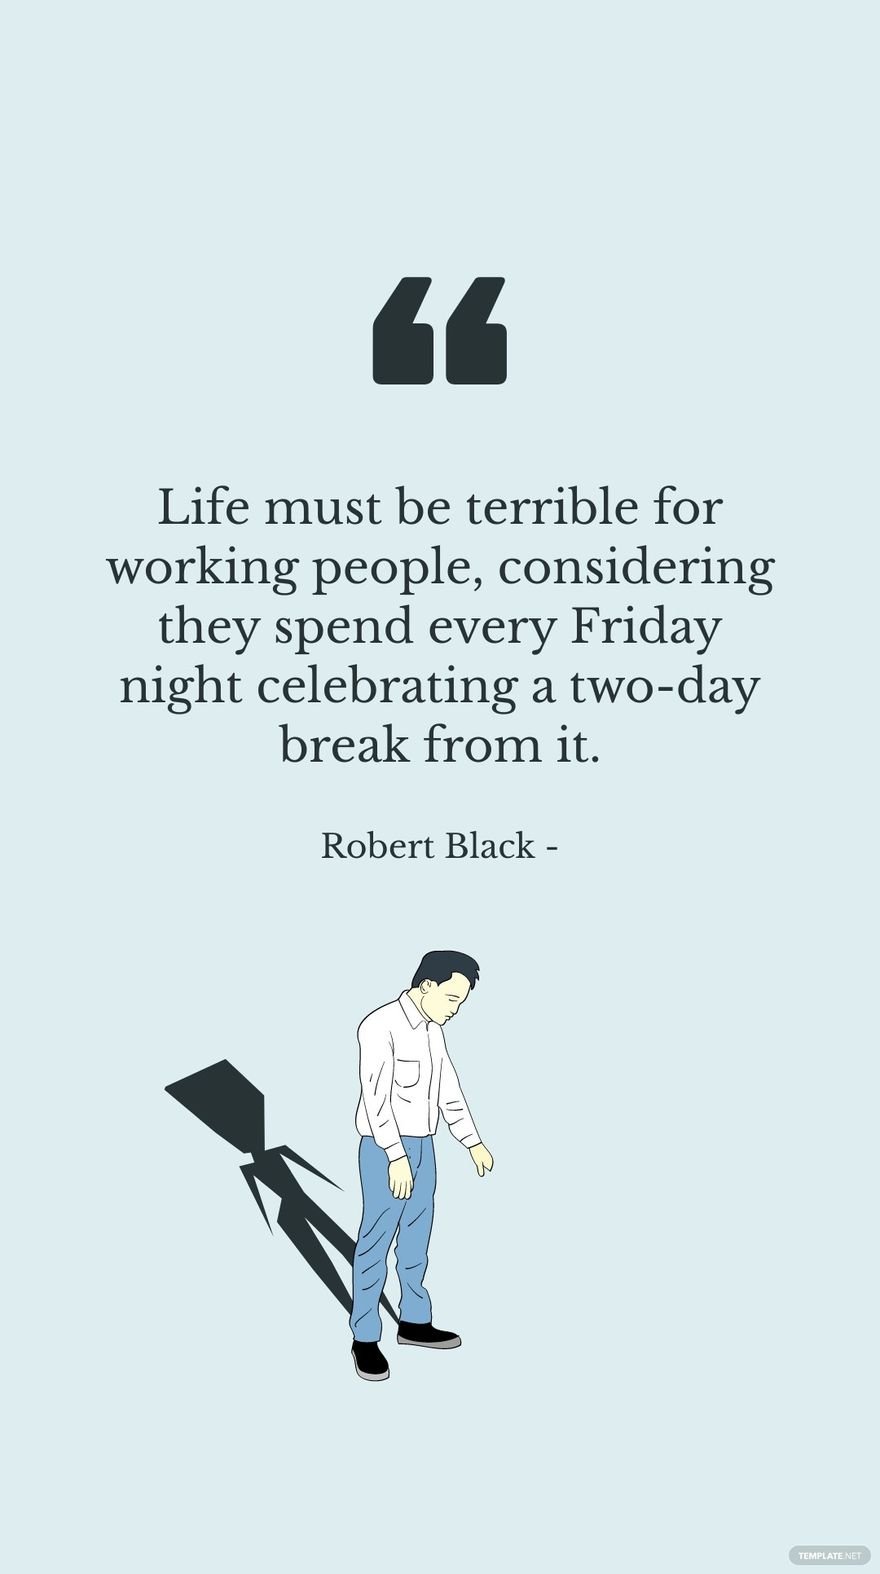 Robert Black - Life must be terrible for working people, considering they spend every Friday night celebrating a two-day break from it.